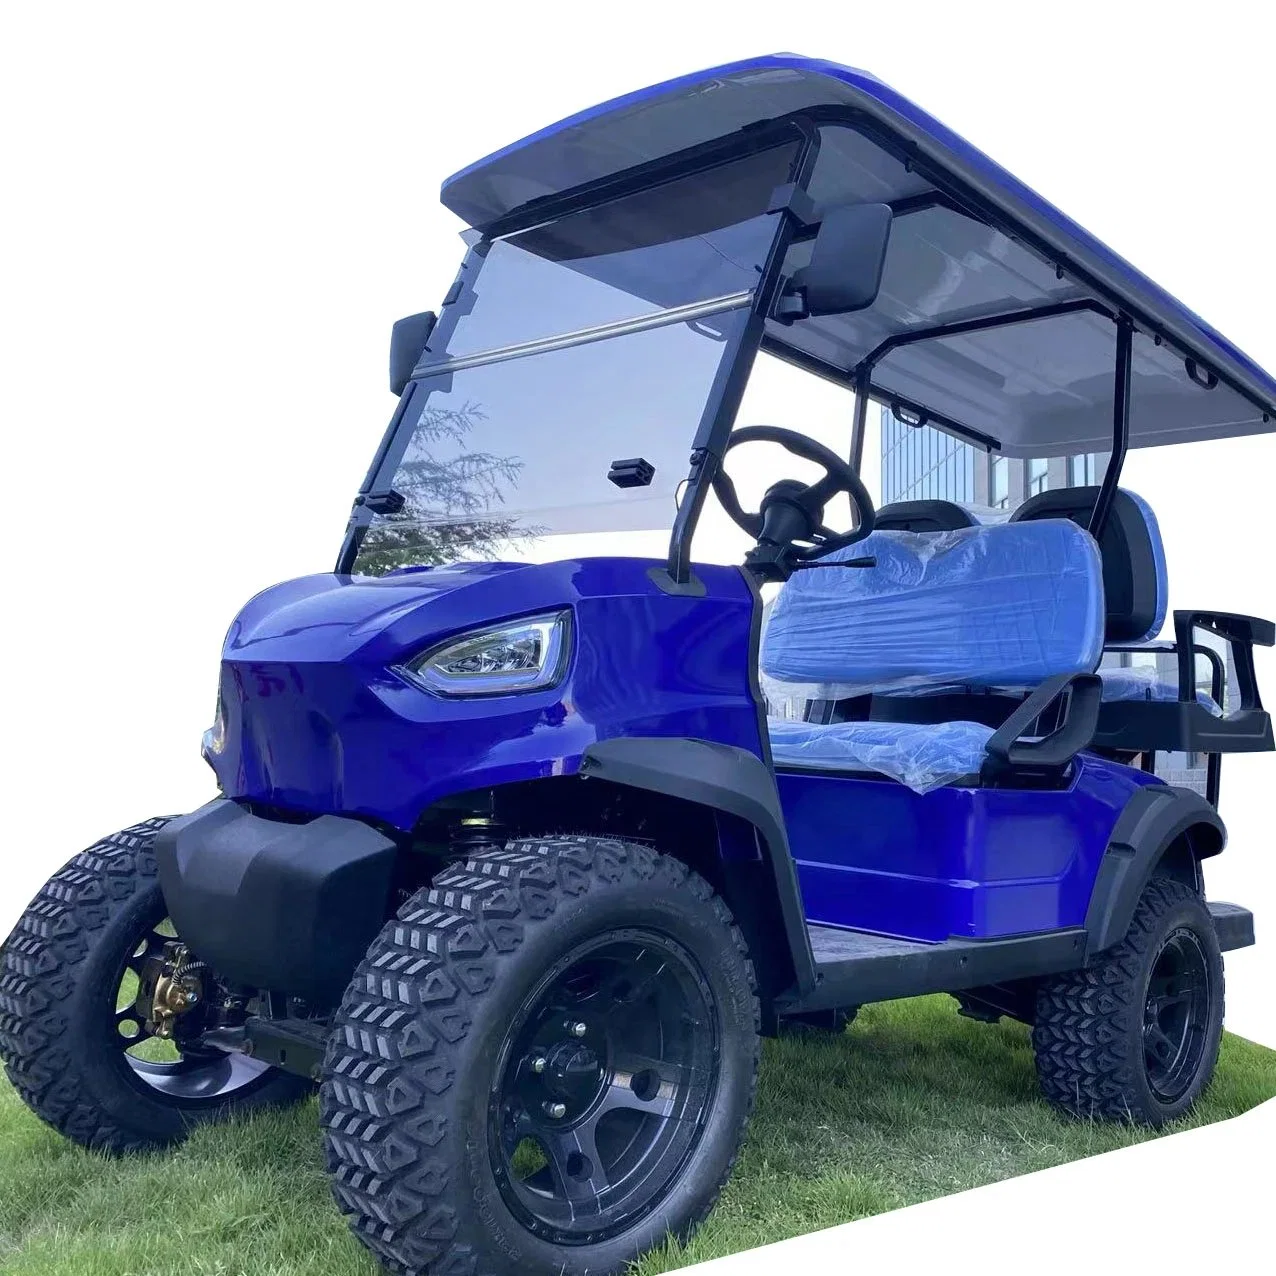 Most Popular 2+2 Seater Electric off-Road Golf Cart 4000W Motor Adult Leisure Mobility Pure Electric Four-Wheel Vehicle1